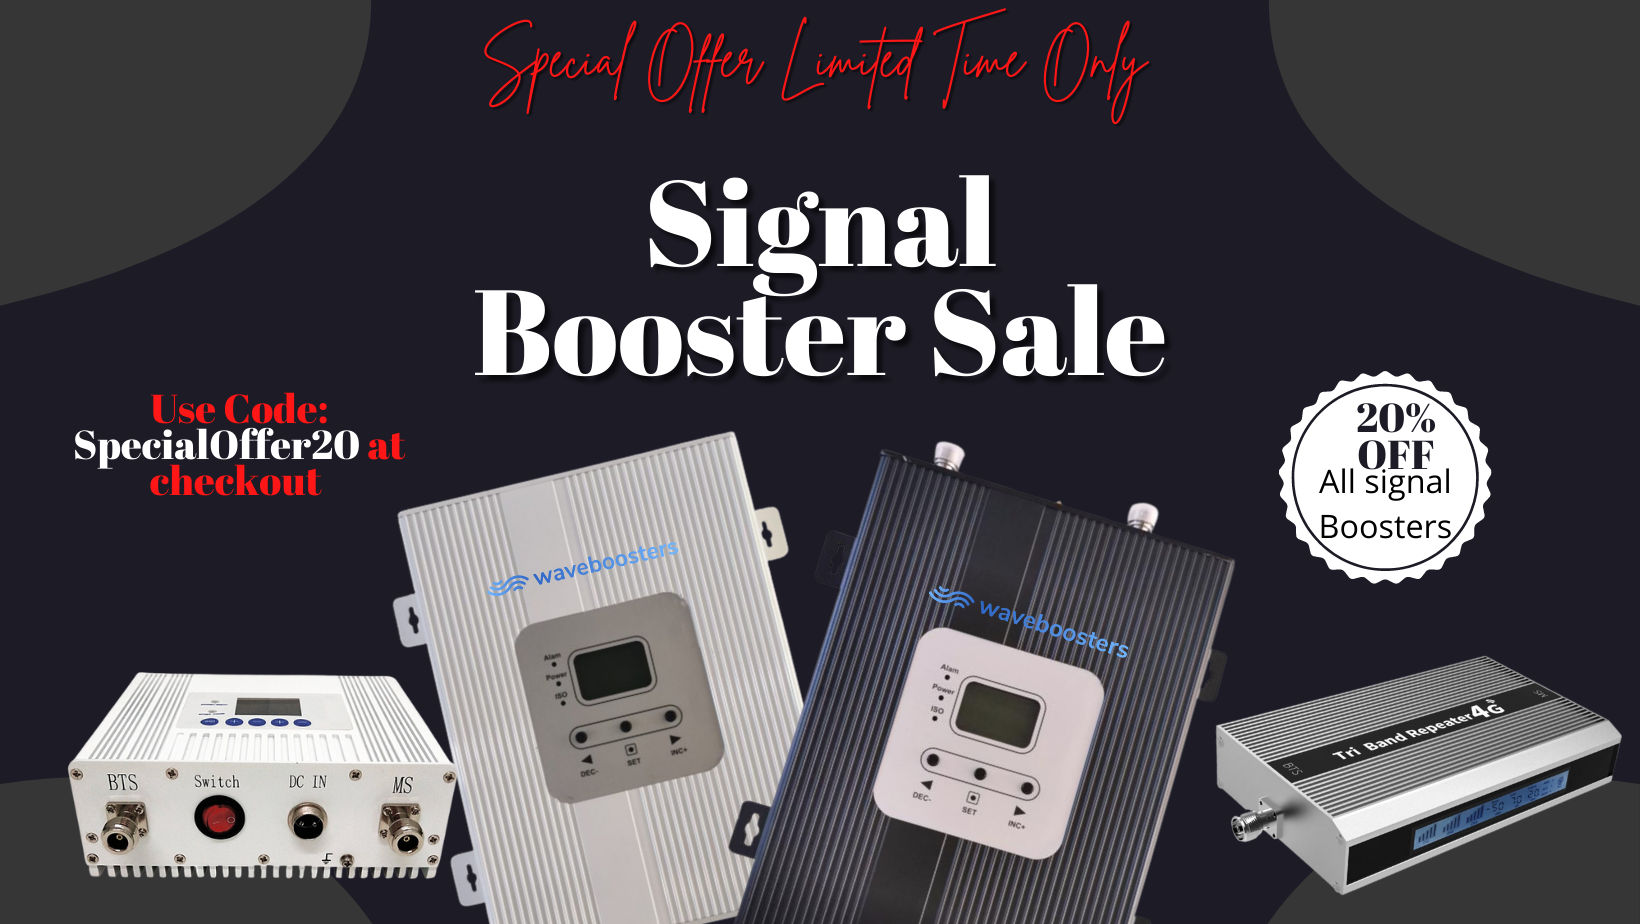 Mobile phone signal Boosters